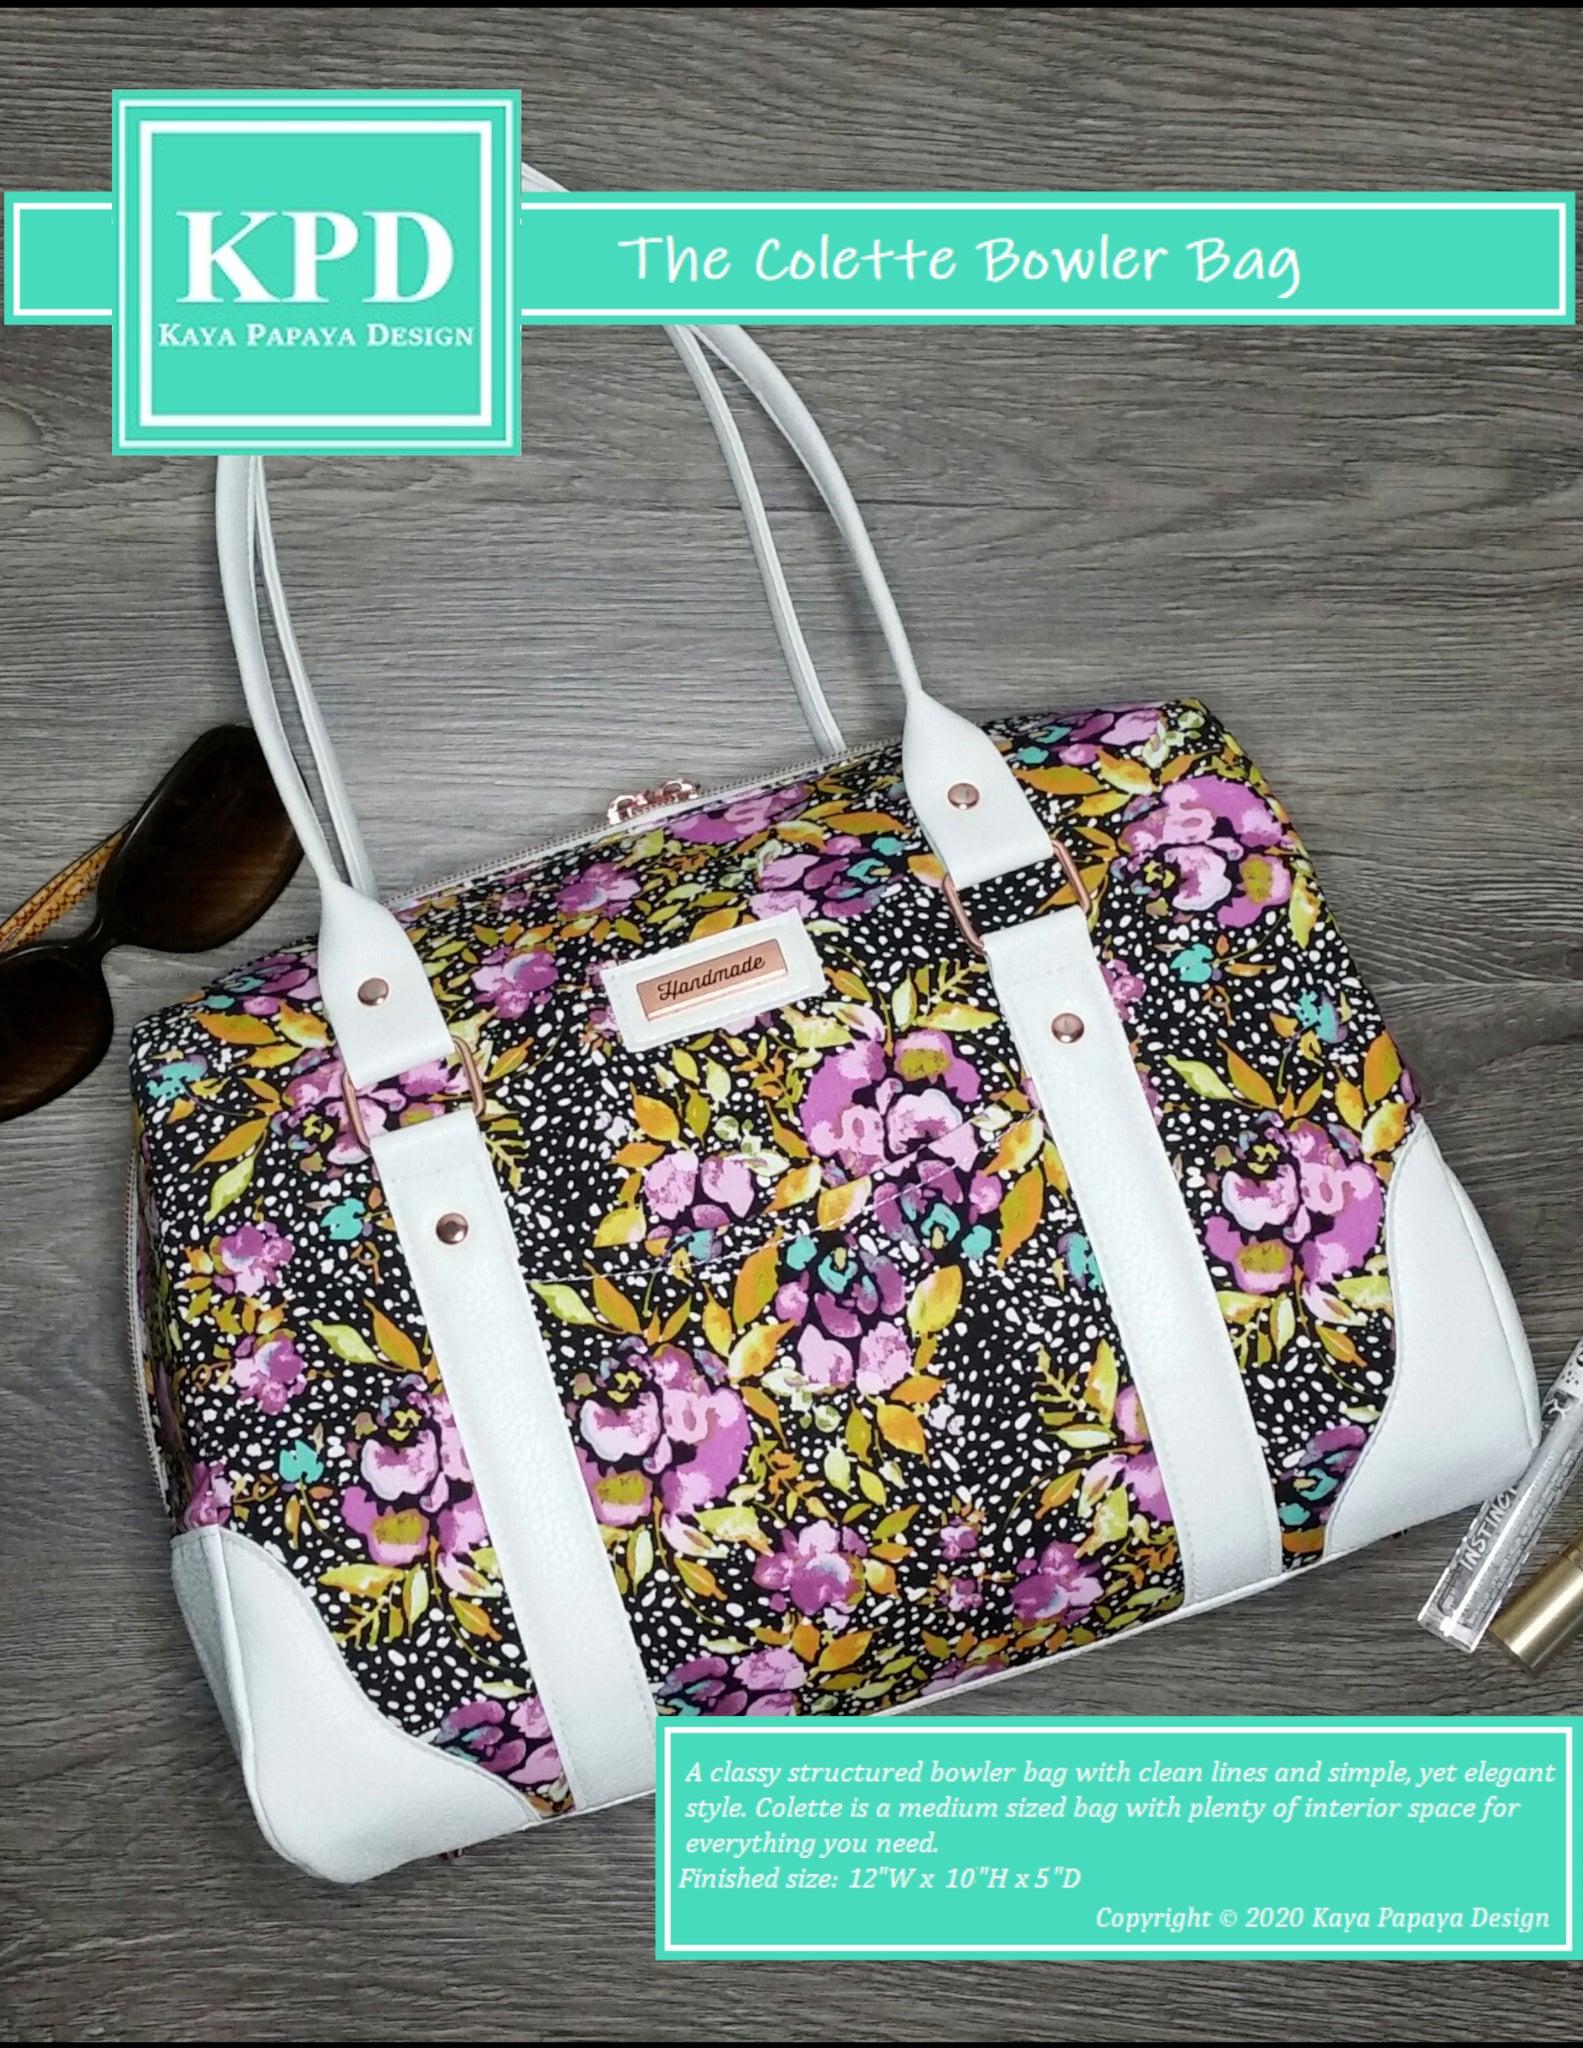 Crochet Patterns For Your New Bags (34 Pics) | Bored Panda